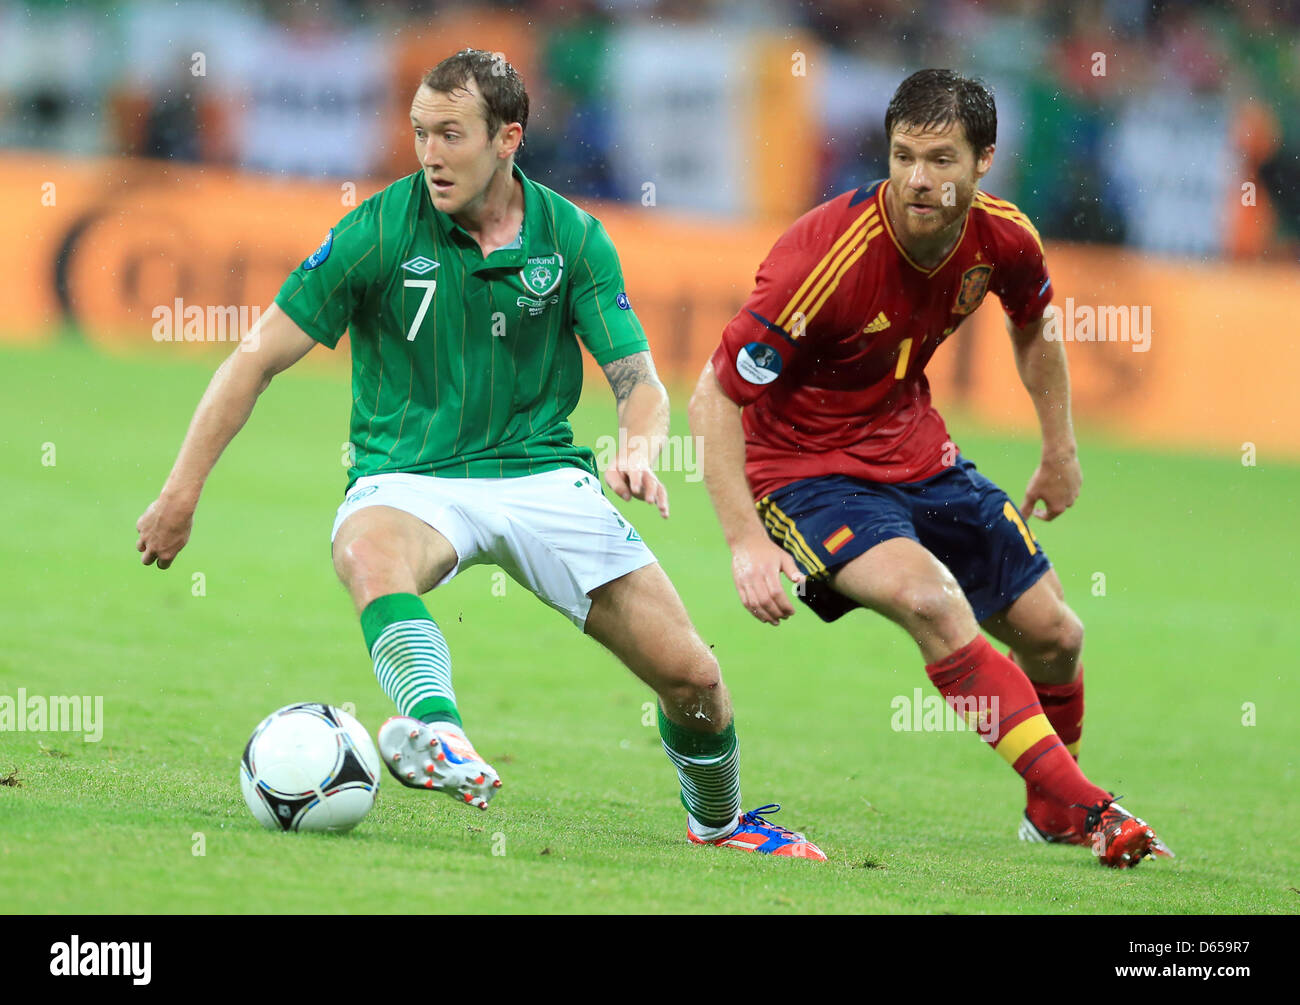 Spain's Xabi Alonso and Ireland's Aiden McGeady (L) vie for the ball during UEFA EURO 2012 group C soccer match Spain vs Italy at Arena Gdansk in Gdansk, Poland, 14 June 2012. Photo: Jens Wolf dpa (Please refer to chapters 7 and 8 of http://dpaq.de/Ziovh for UEFA Euro 2012 Terms & Conditions)  +++(c) dpa - Bildfunk+++ Stock Photo